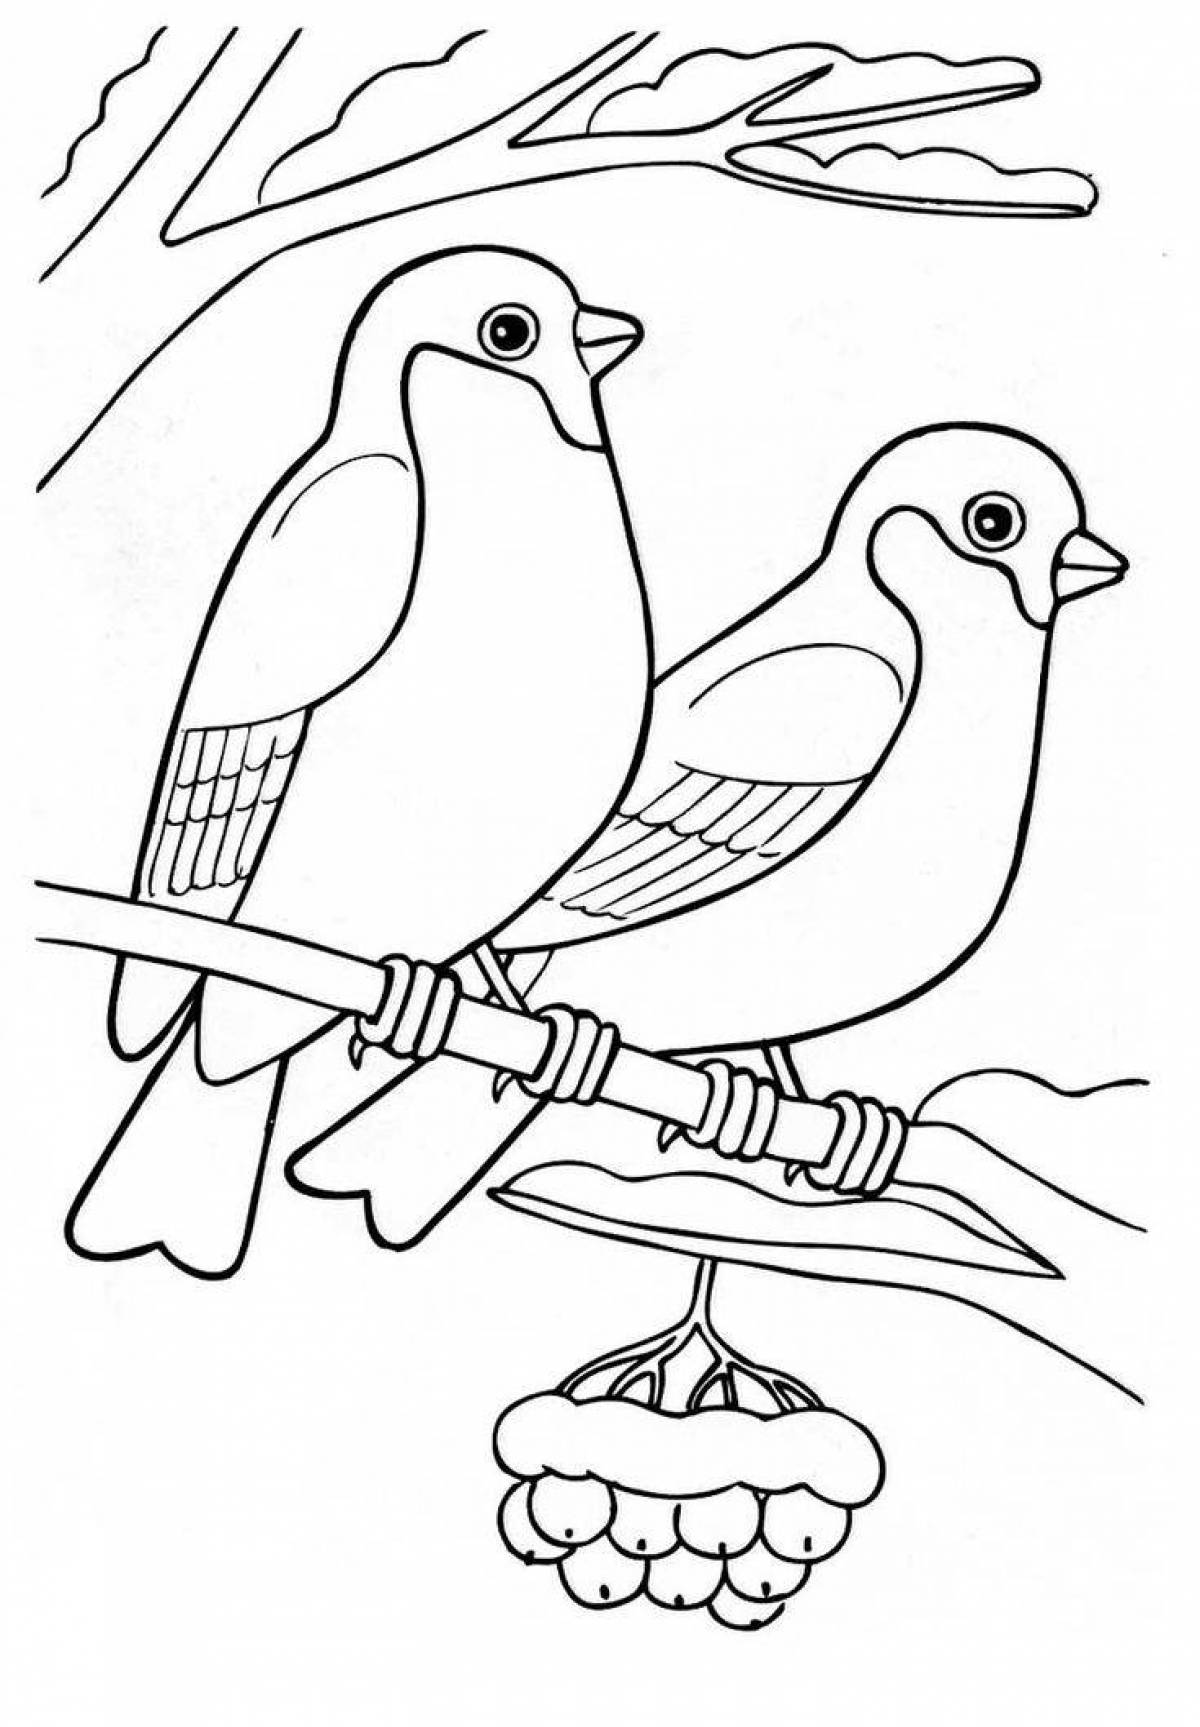 Fabulous coloring pages of wintering birds for kids